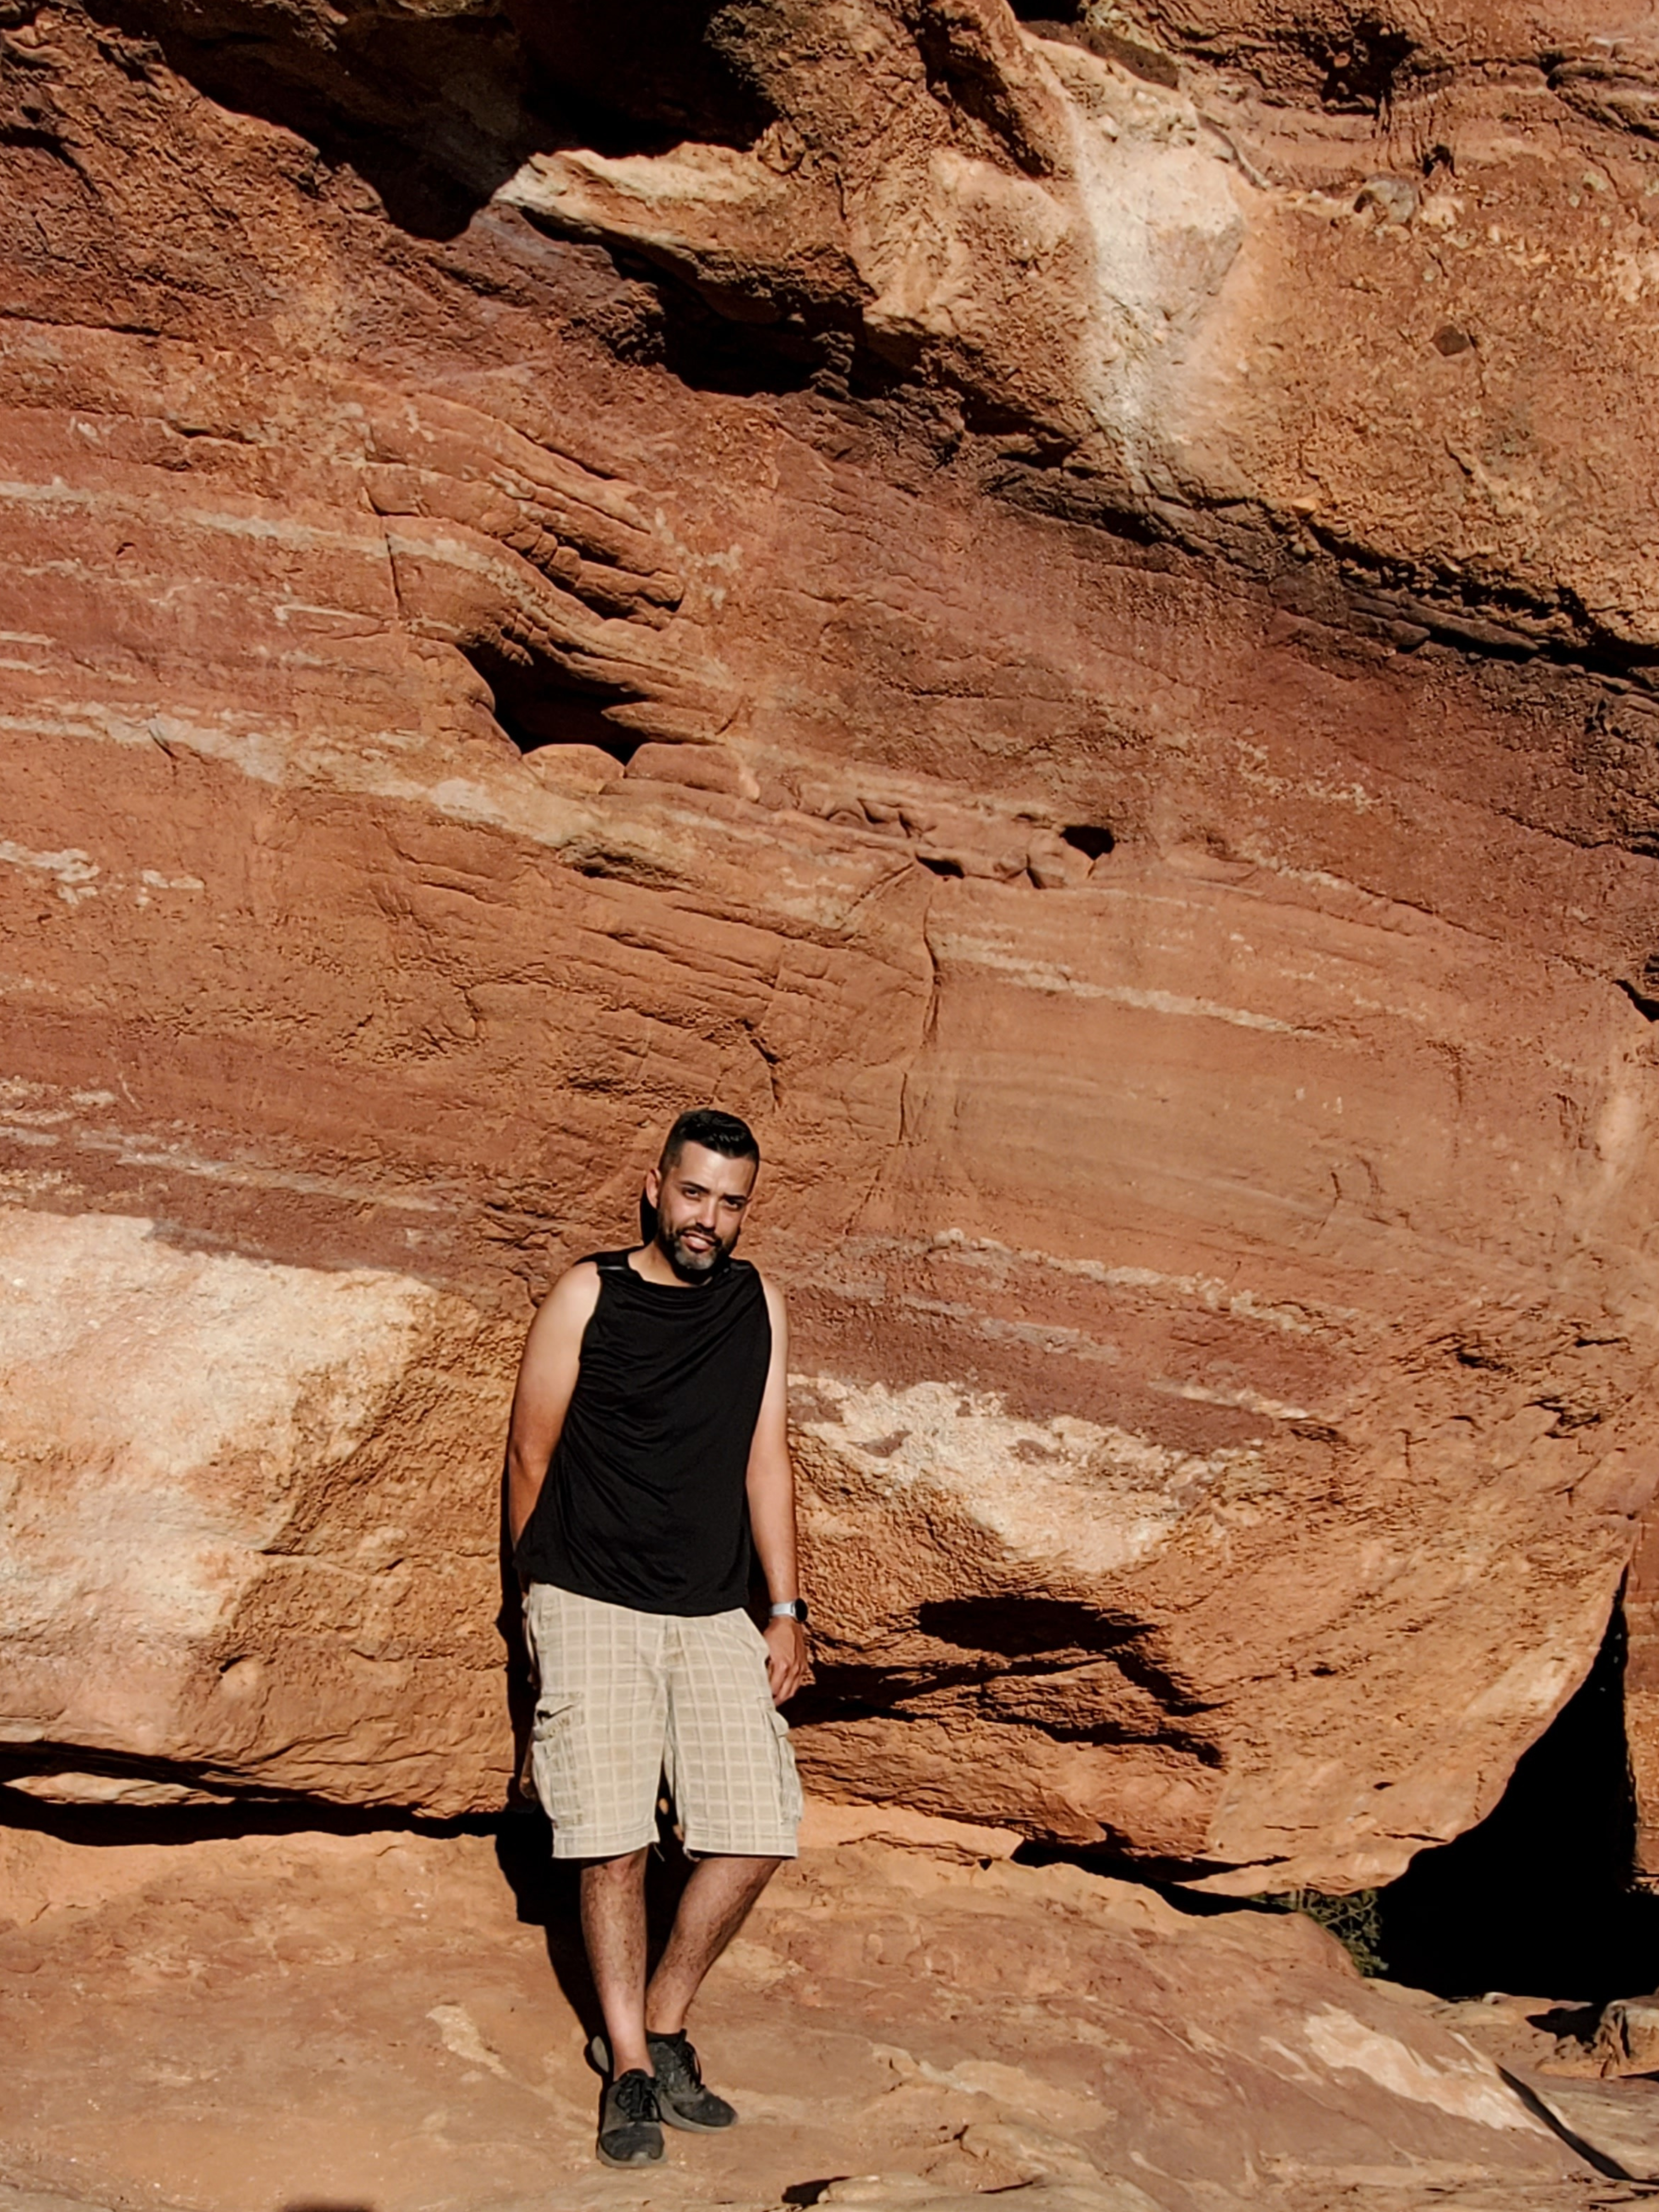 Jonathan Silva posing for a photo outdoors in front a big red rock